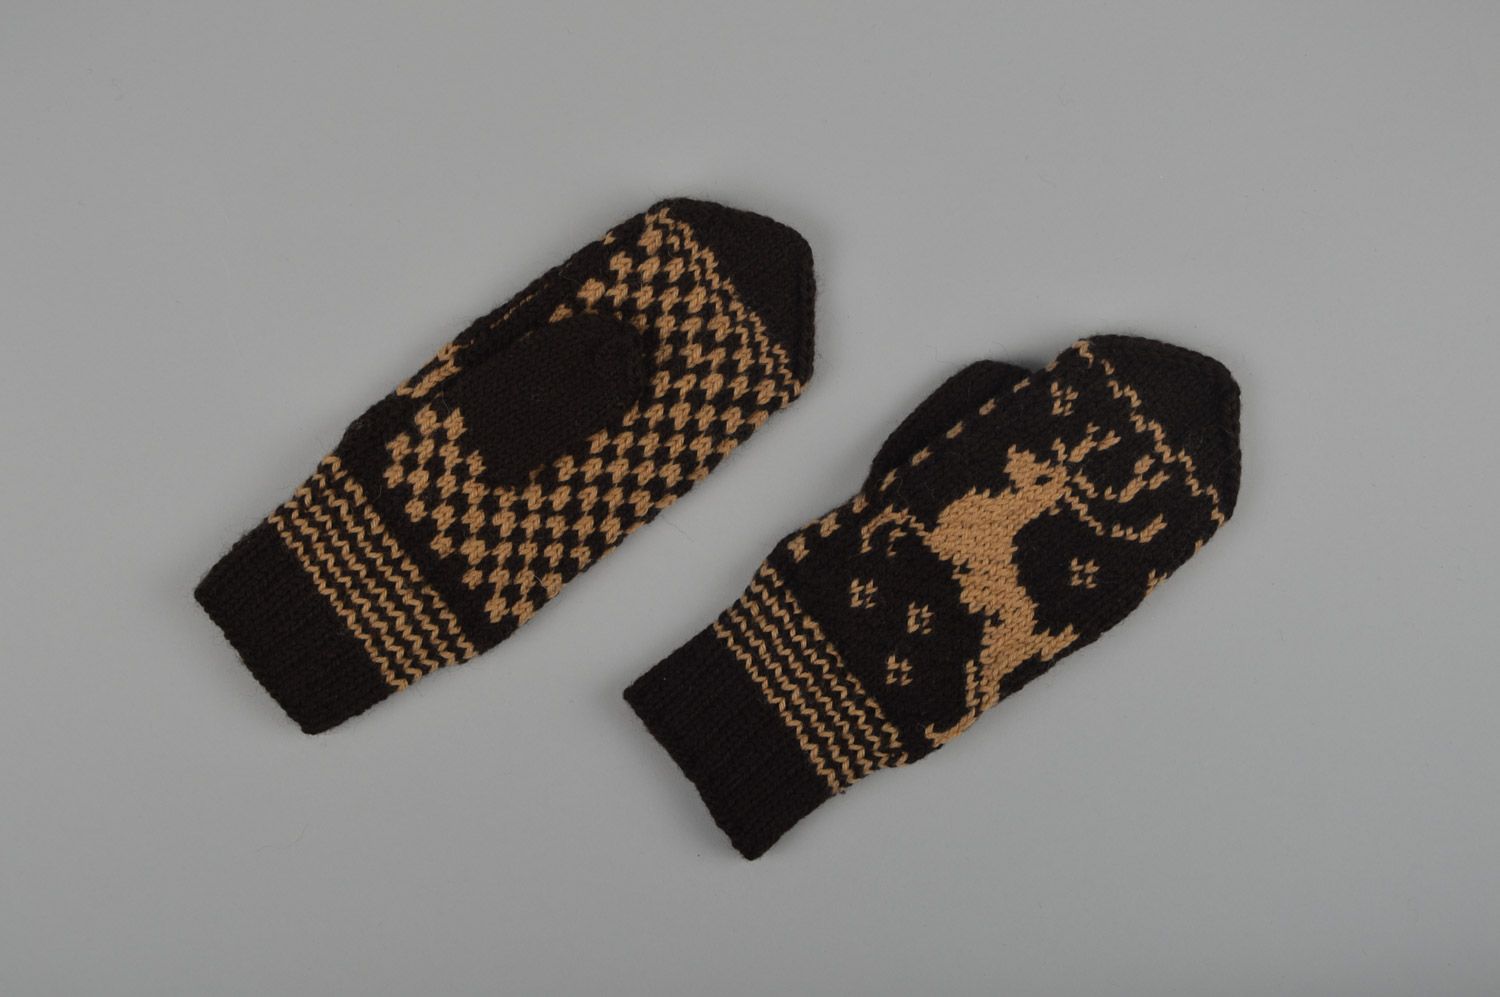 Handmade warm winter mittens knitted of wool with fancy ornaments Deer for men photo 4